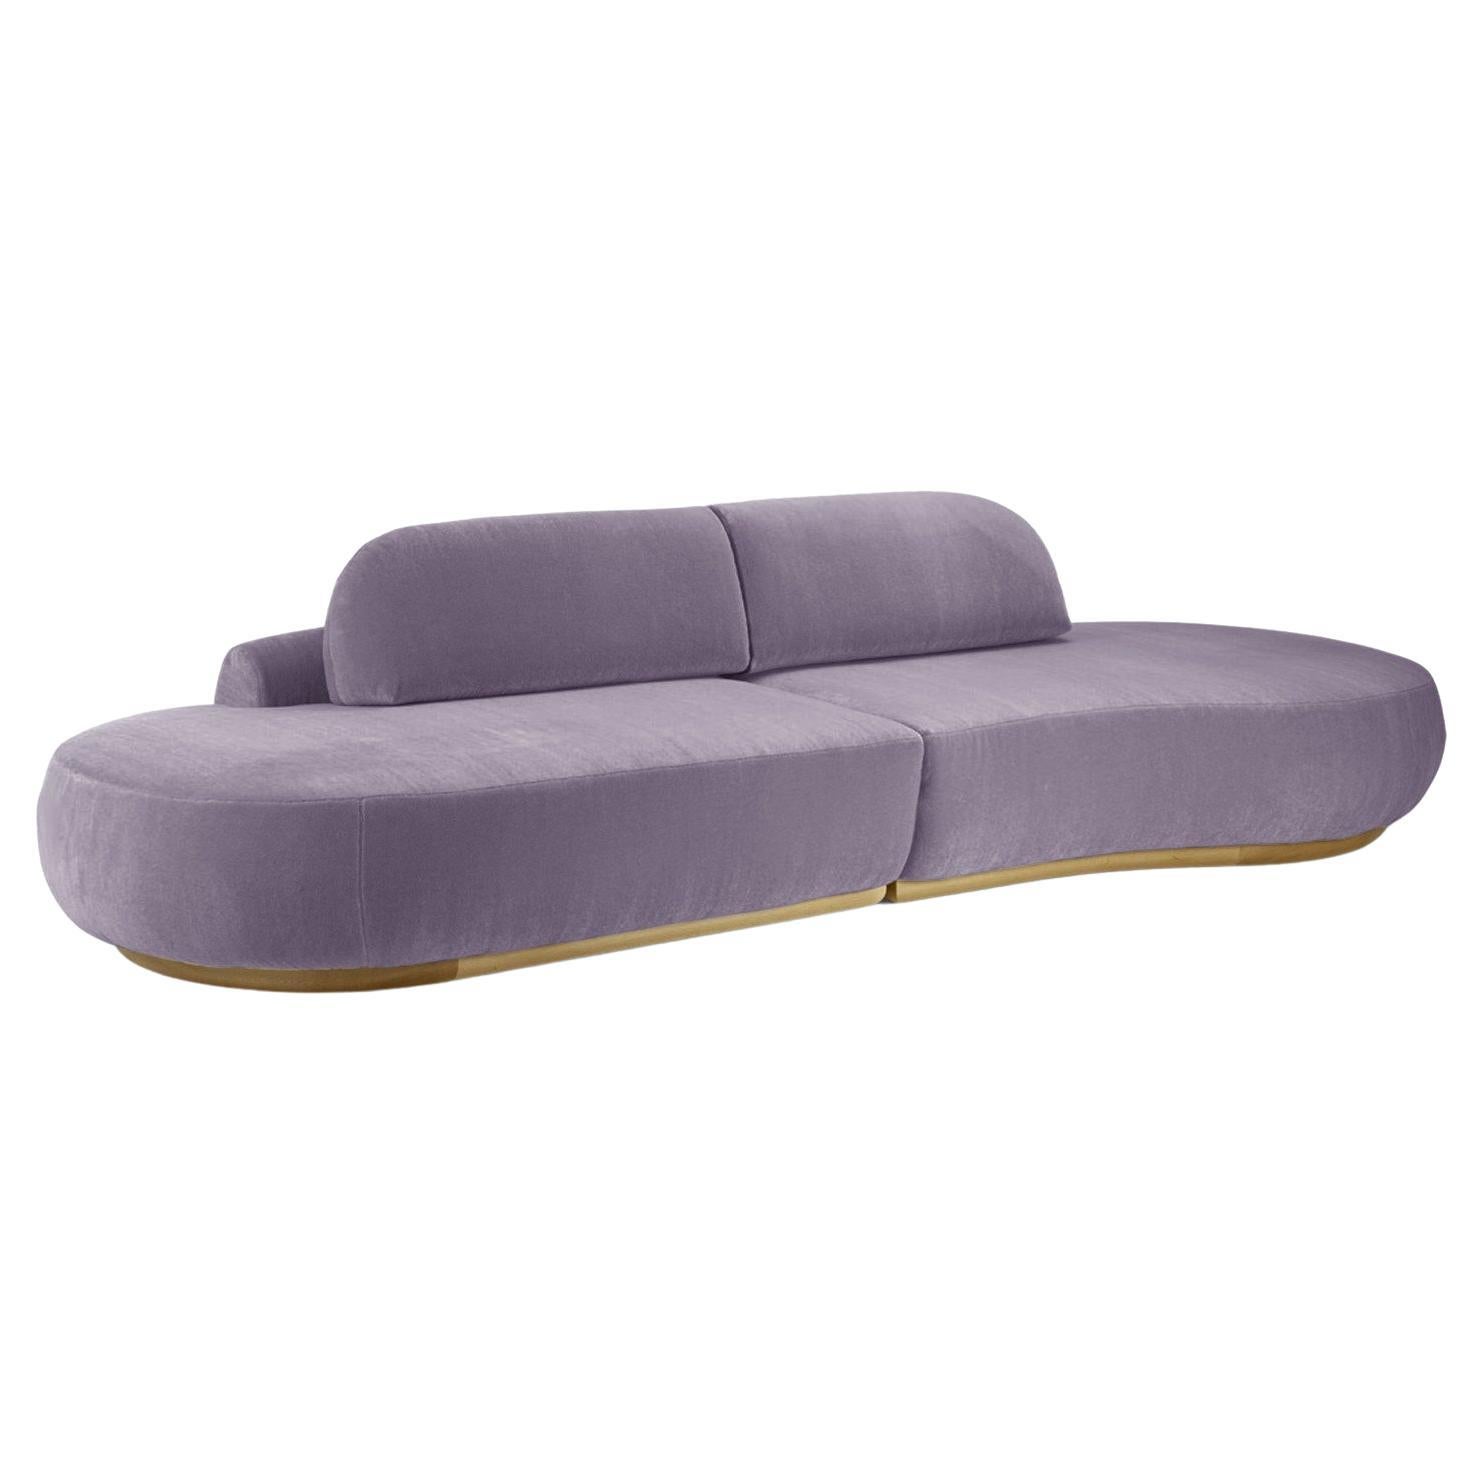 Naked Curved Sectional Sofa, 2 Piece with Natural Oak and Paris Lavanda For Sale